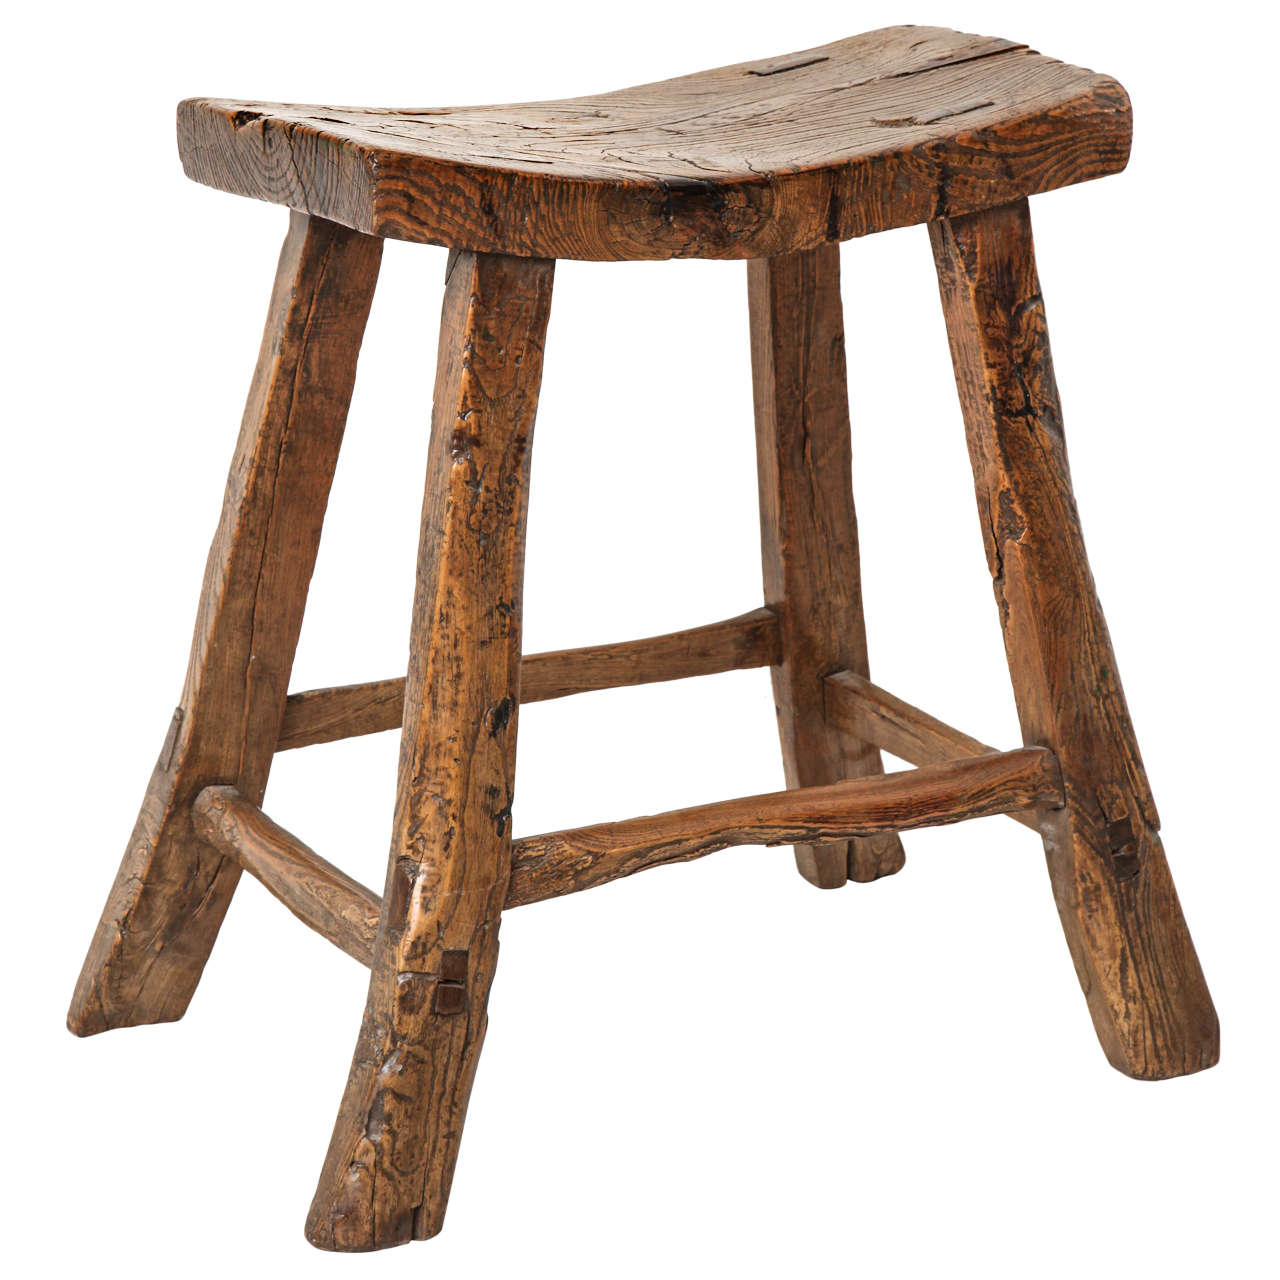 A 19th century Chinese elm wood stool